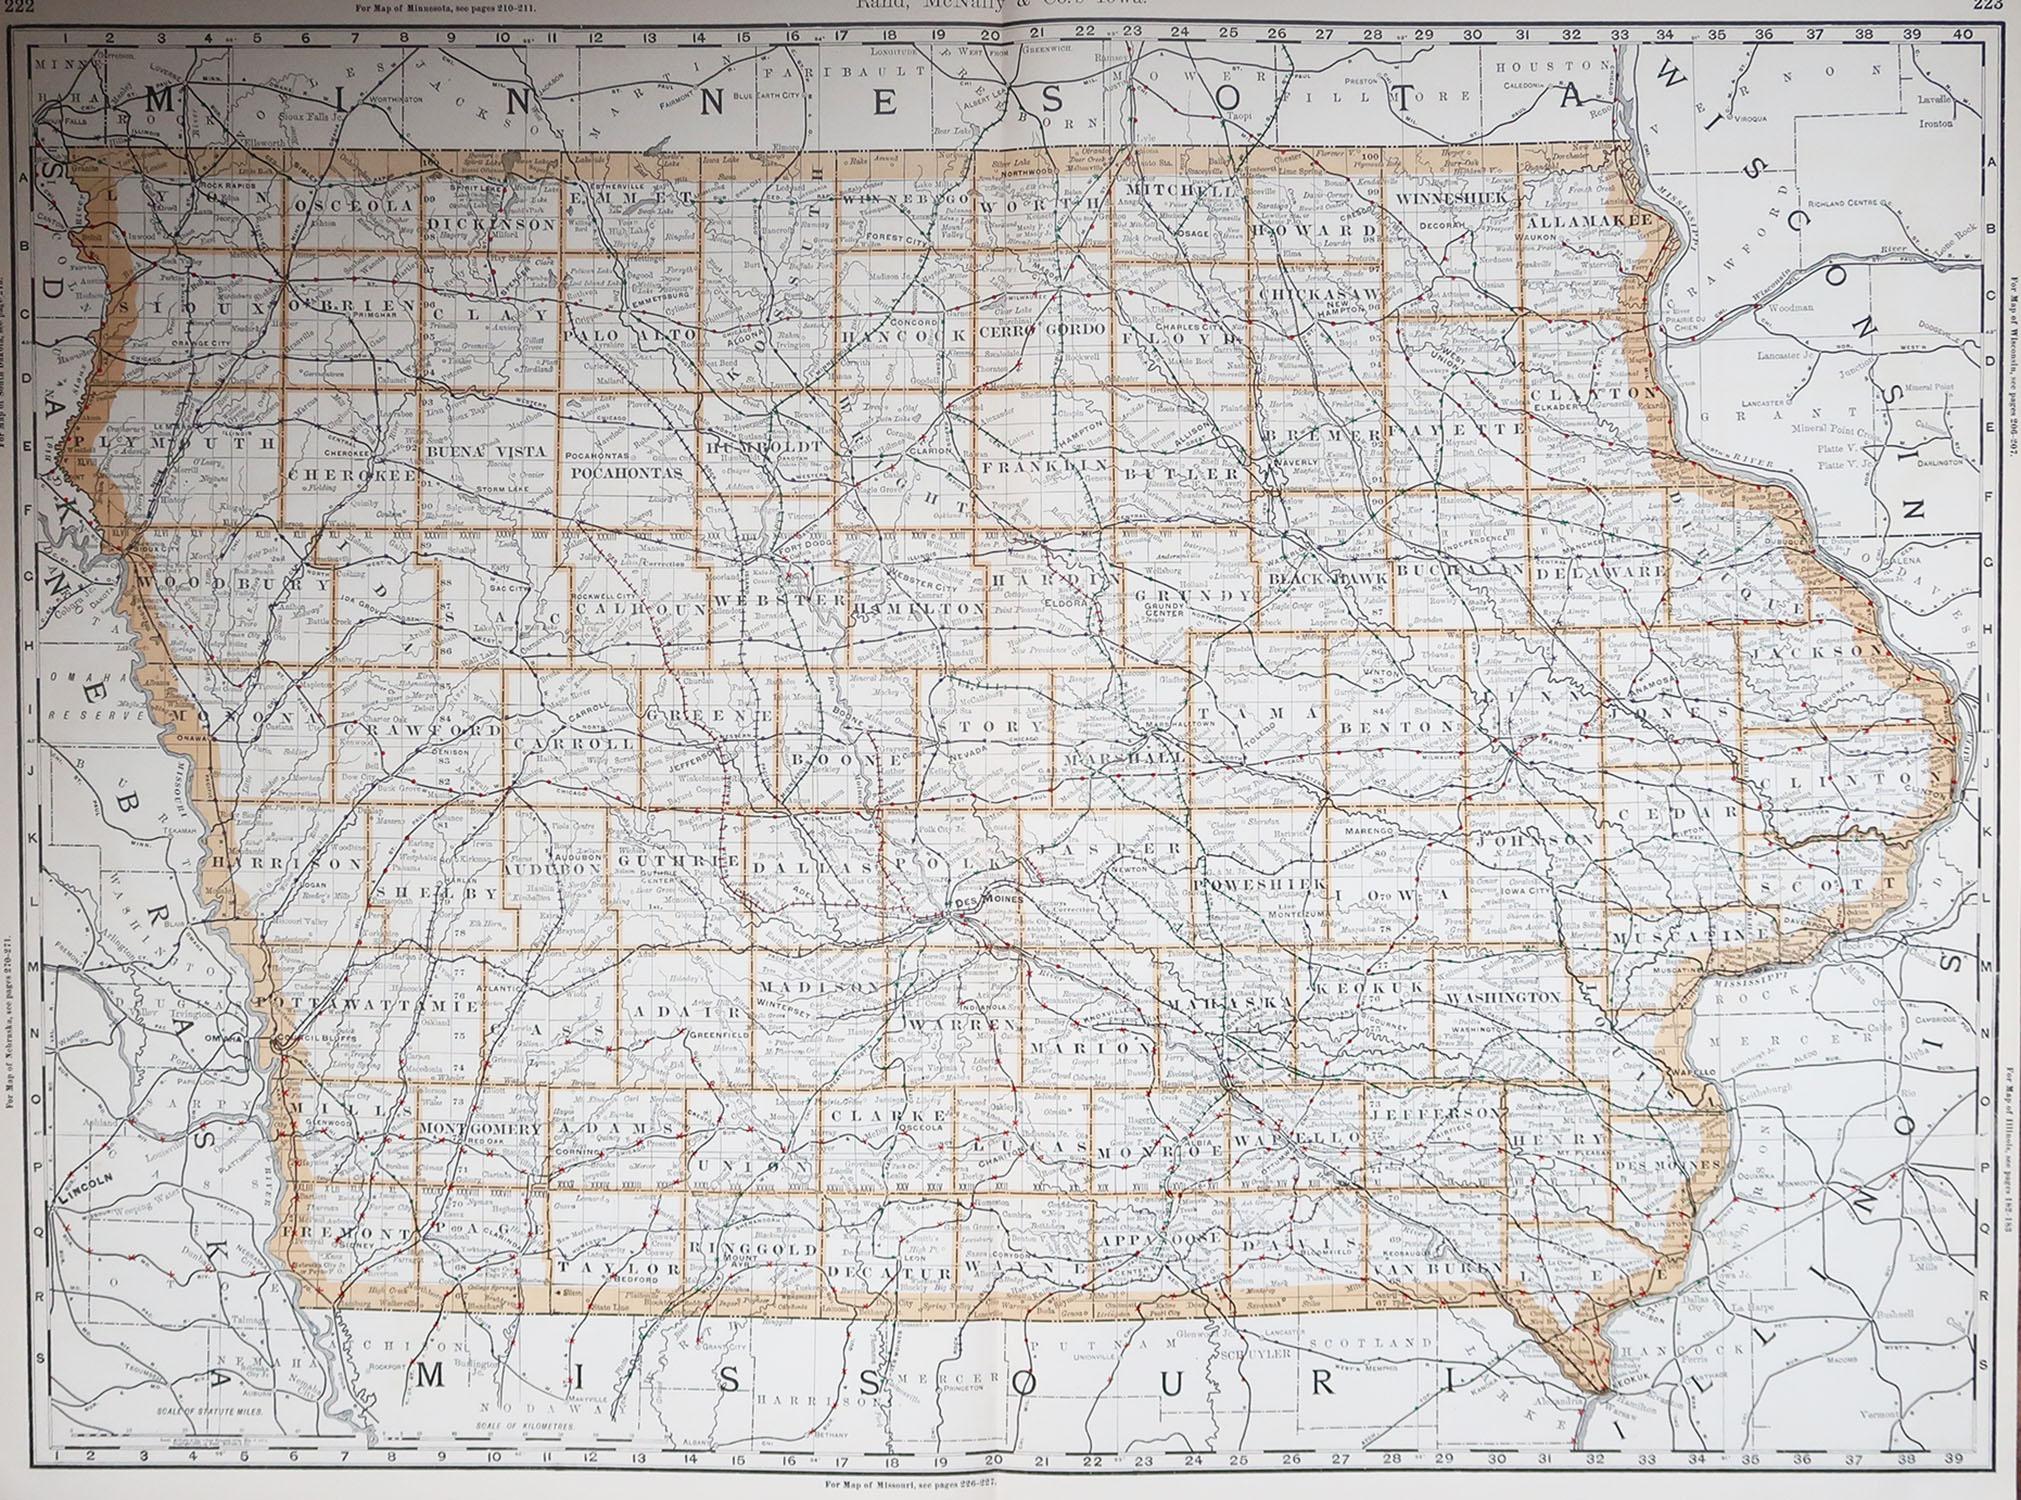 Fabulous map of Iowa.

Original color.

By Rand, McNally & Co.

Published, 1894.

Unframed.

Free shipping.